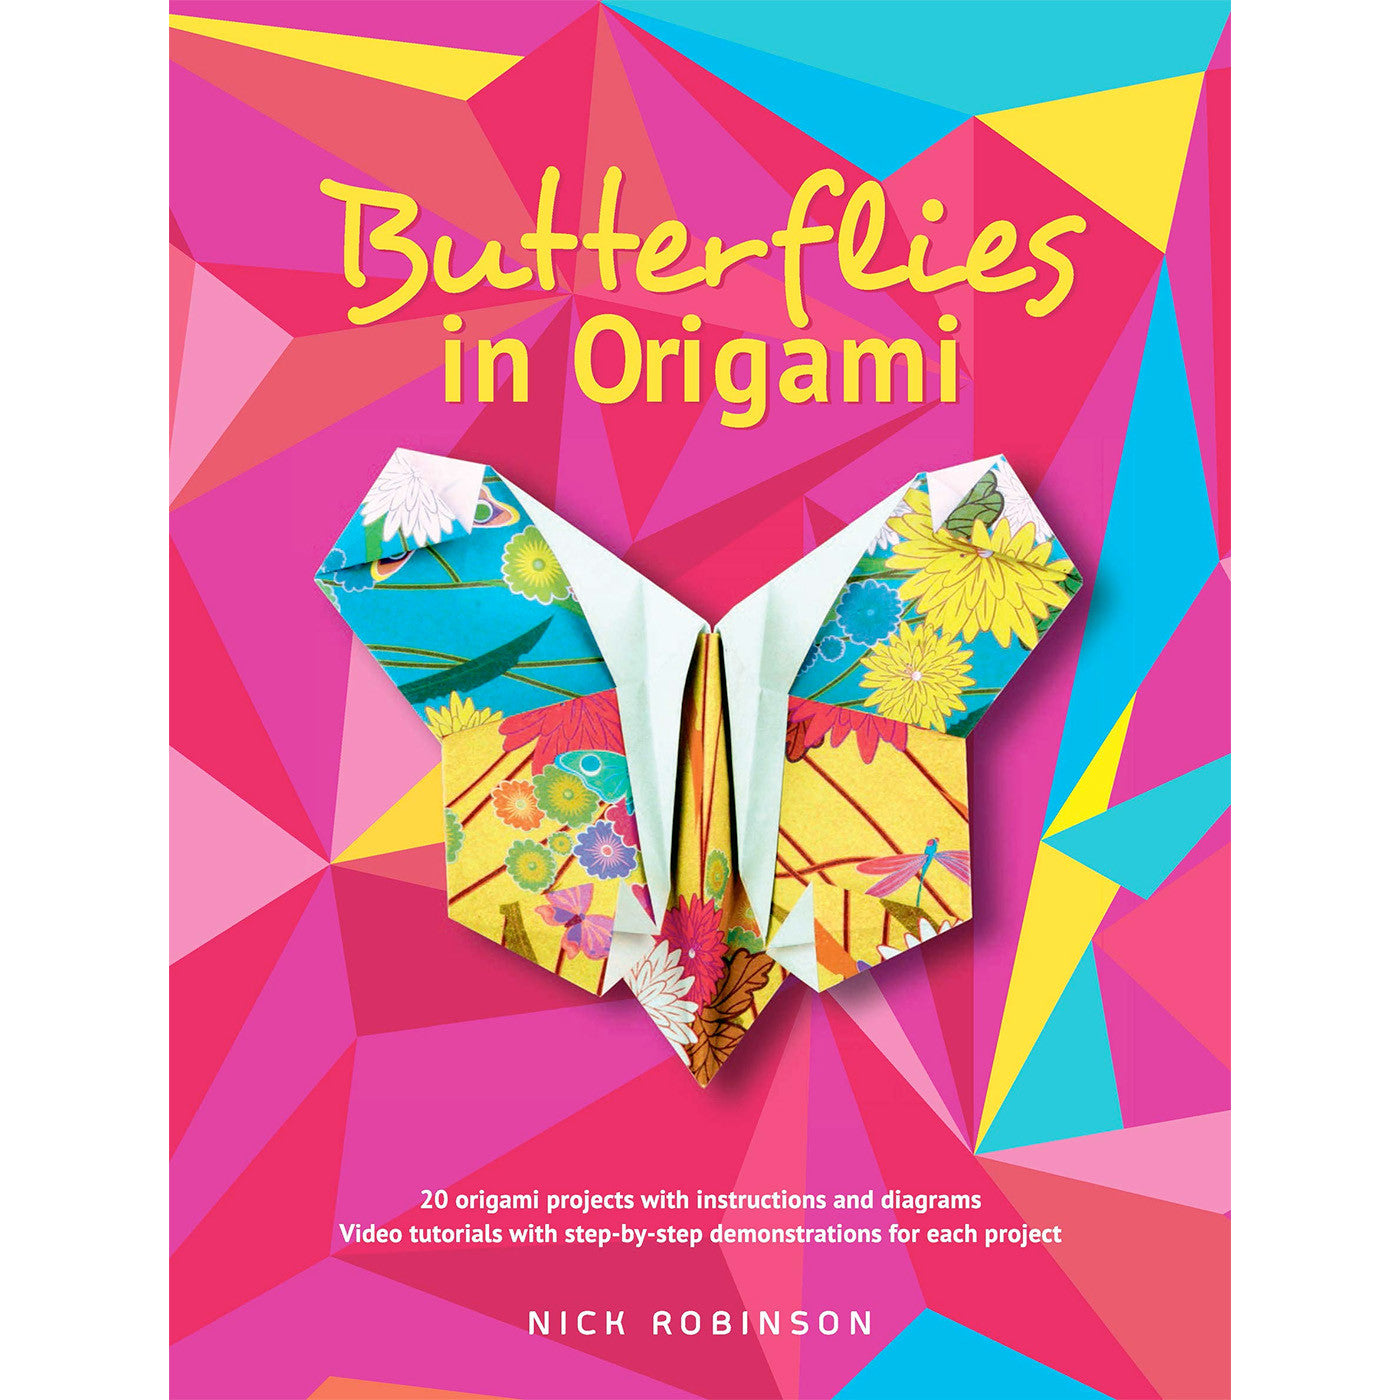 Origami books by Nick Robinson